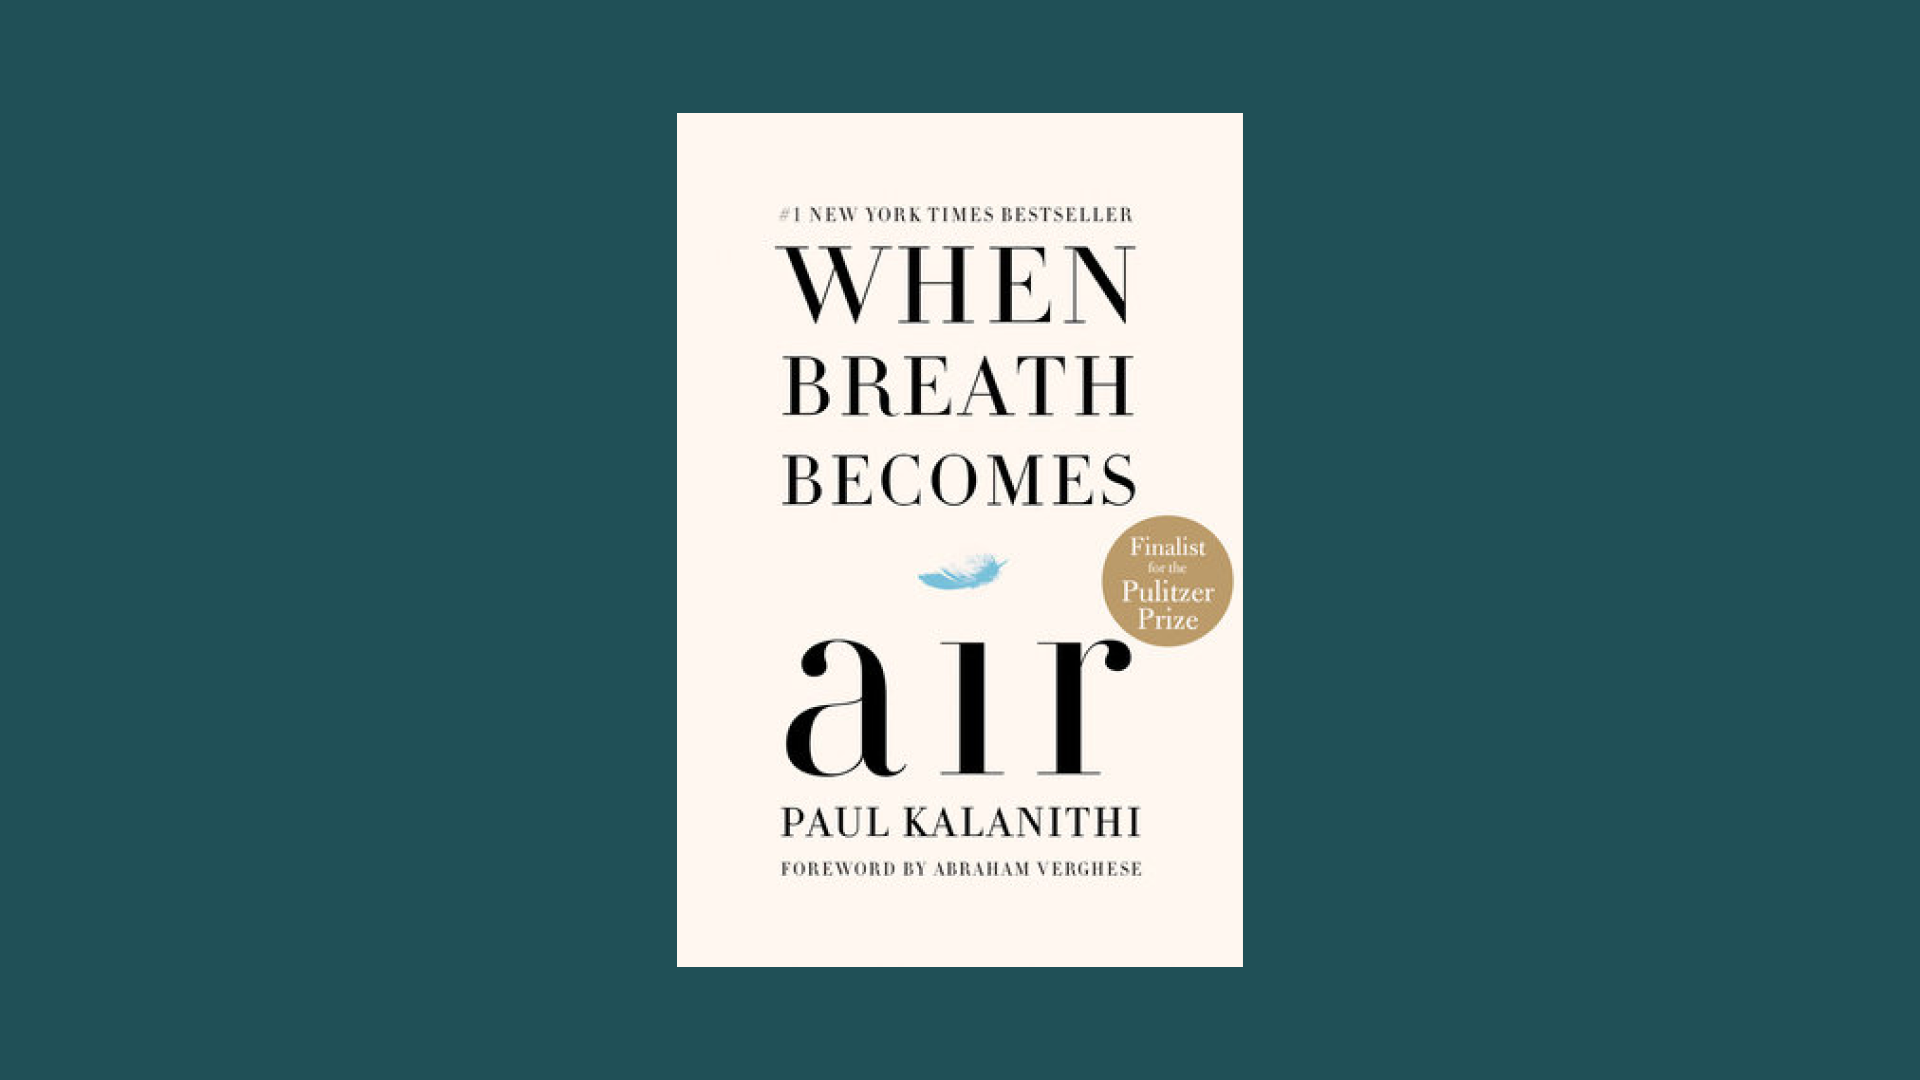 "When Breath Becomes Air" by Paul Kalanithi